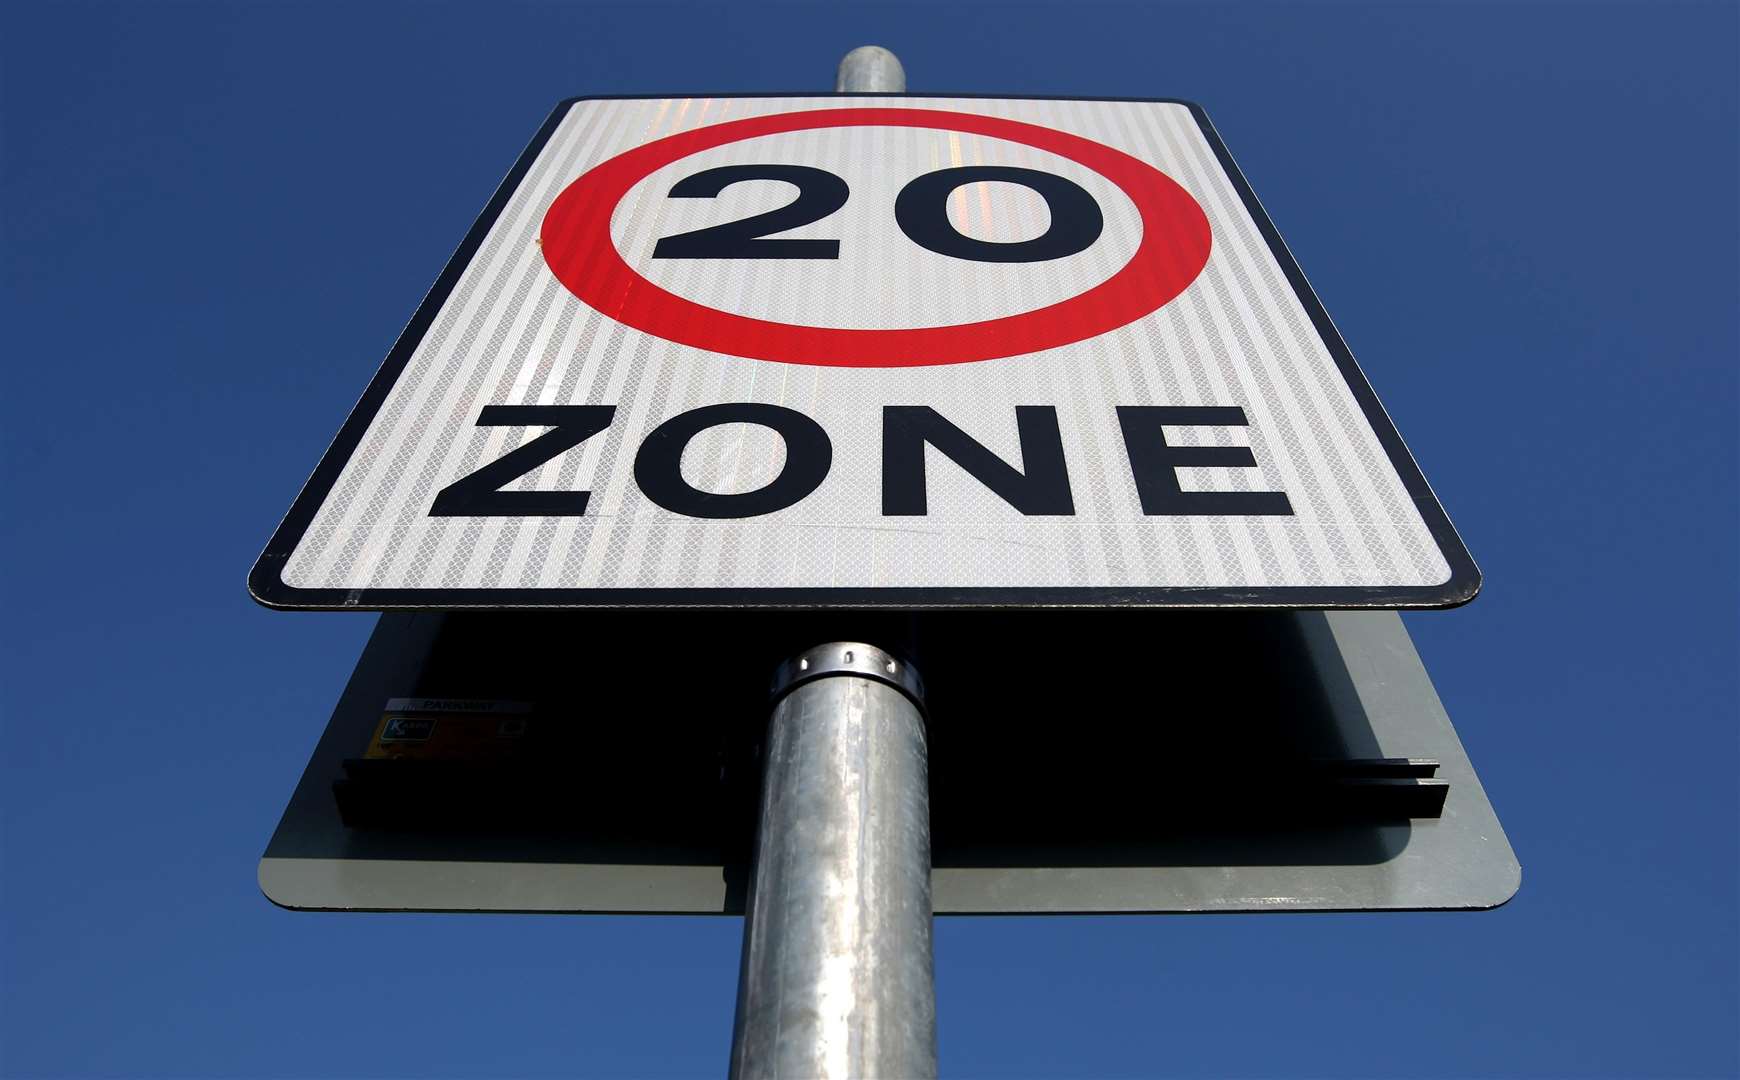 Rishi Sunak said ‘blanket’ 20mph hour limits needed to stop being imposed (Dominic Lipinski/PA)